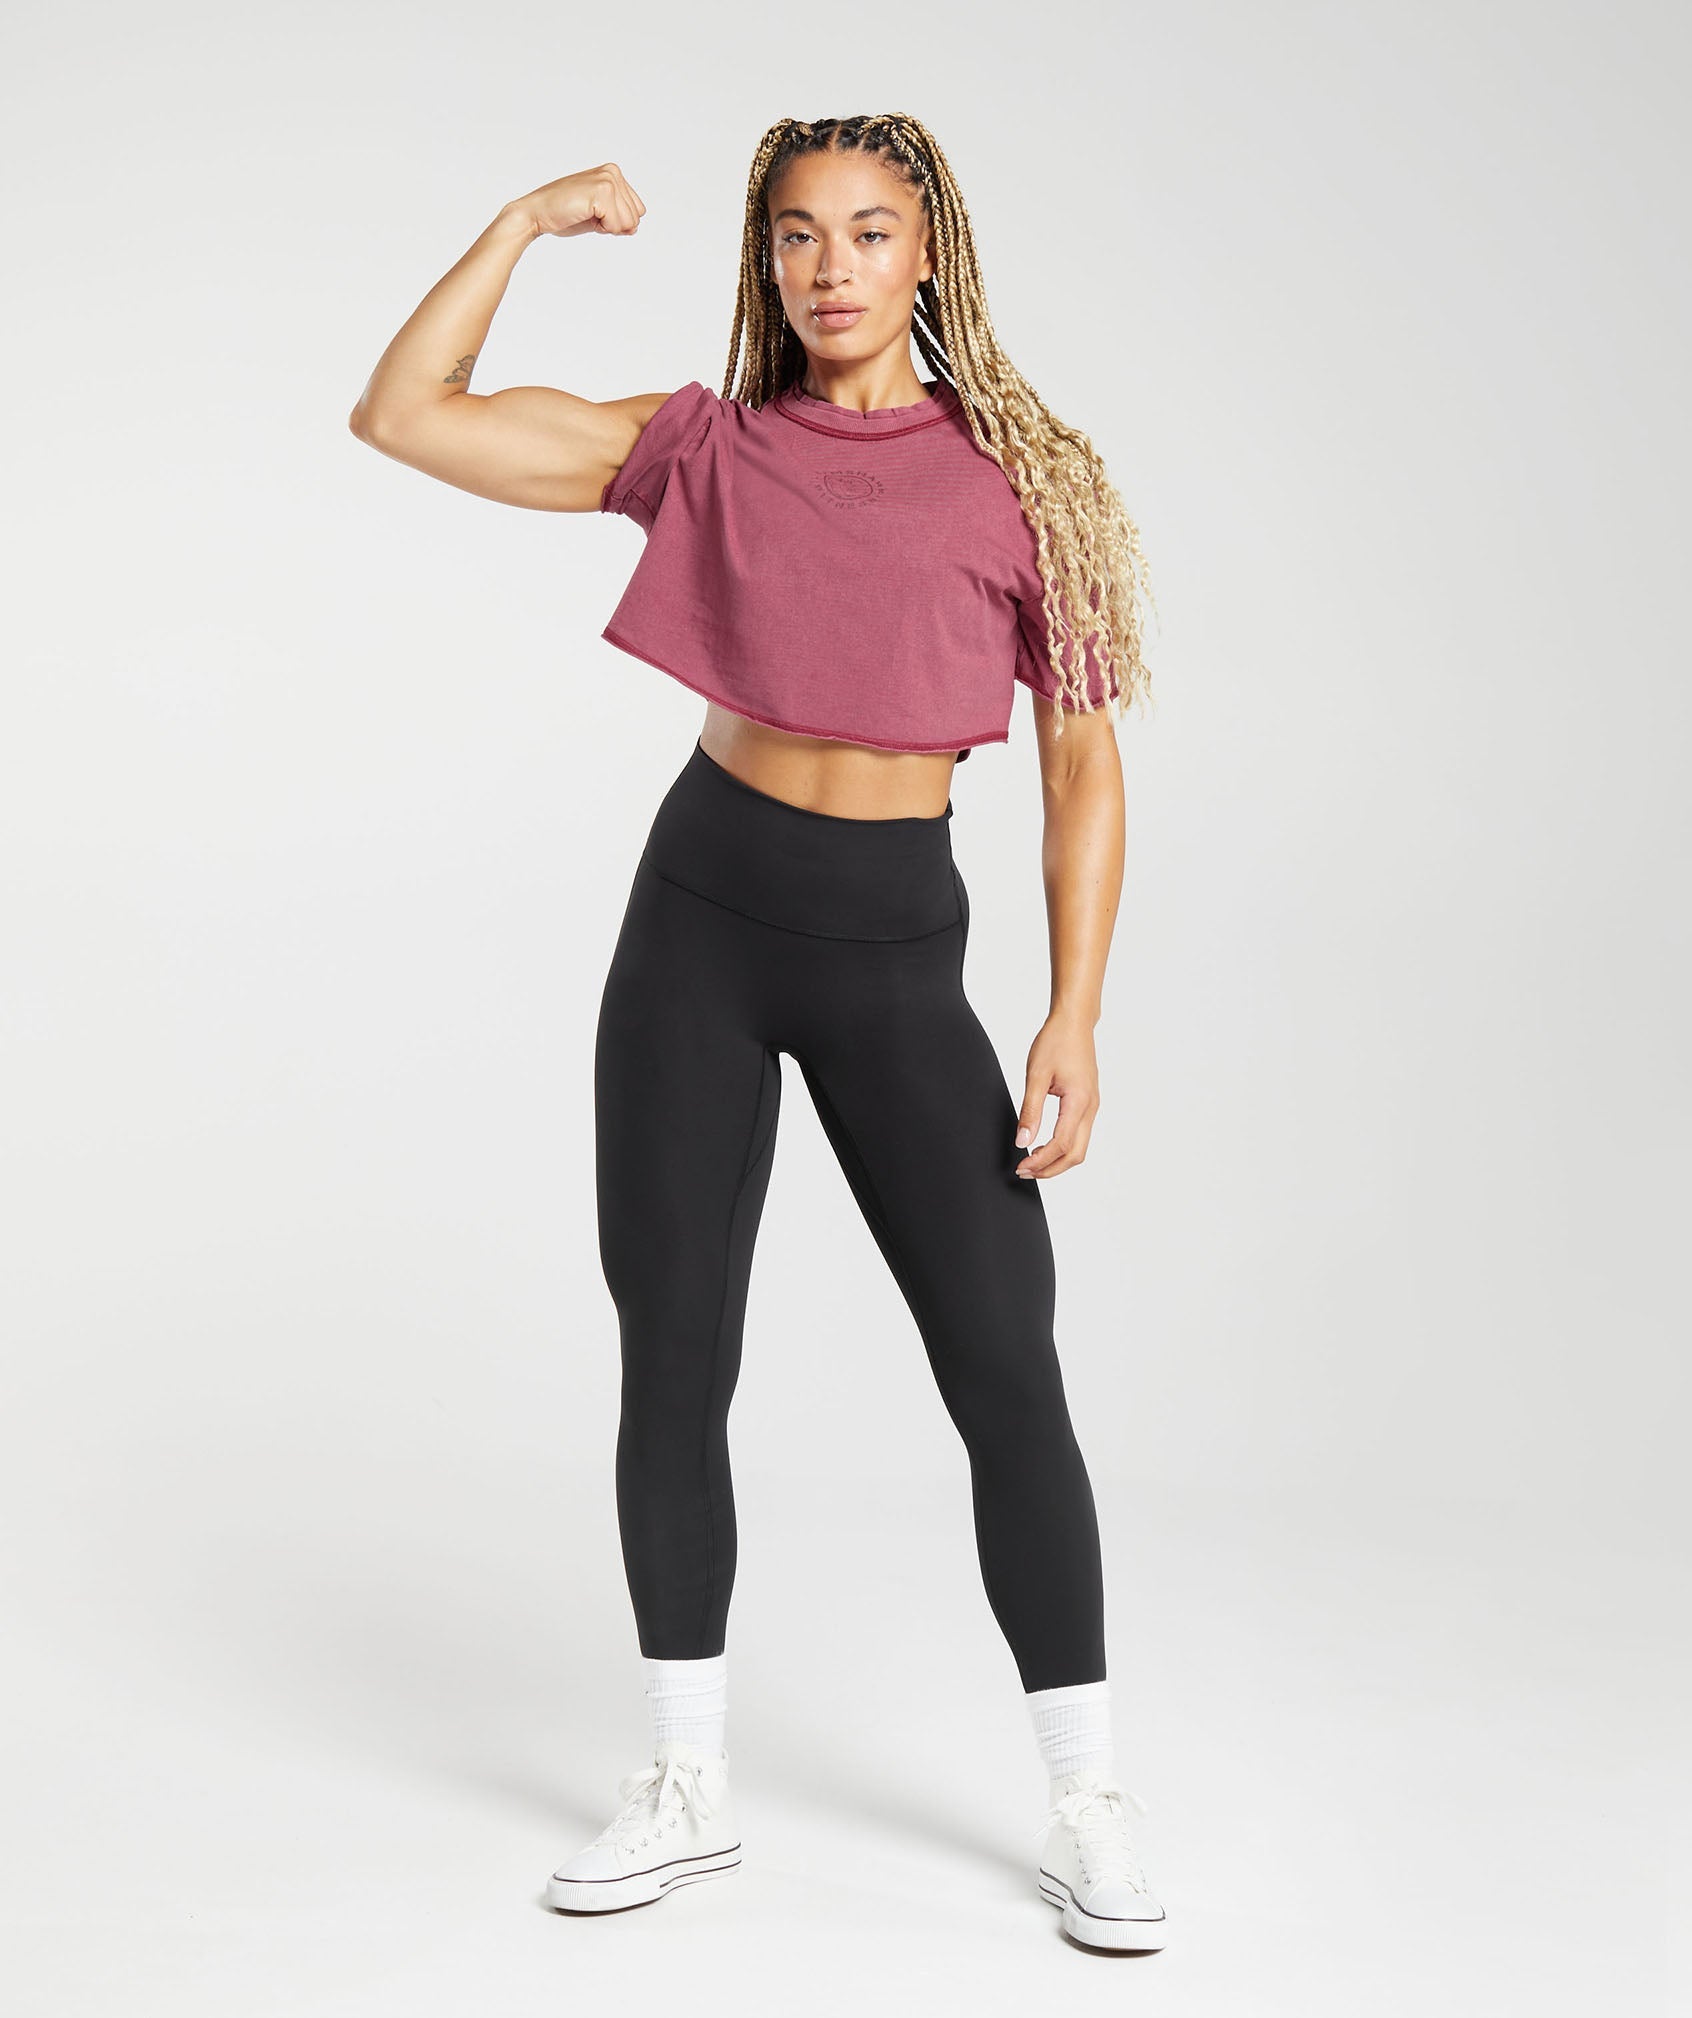 Legacy Washed Crop Top in Raspberry Pink - view 4